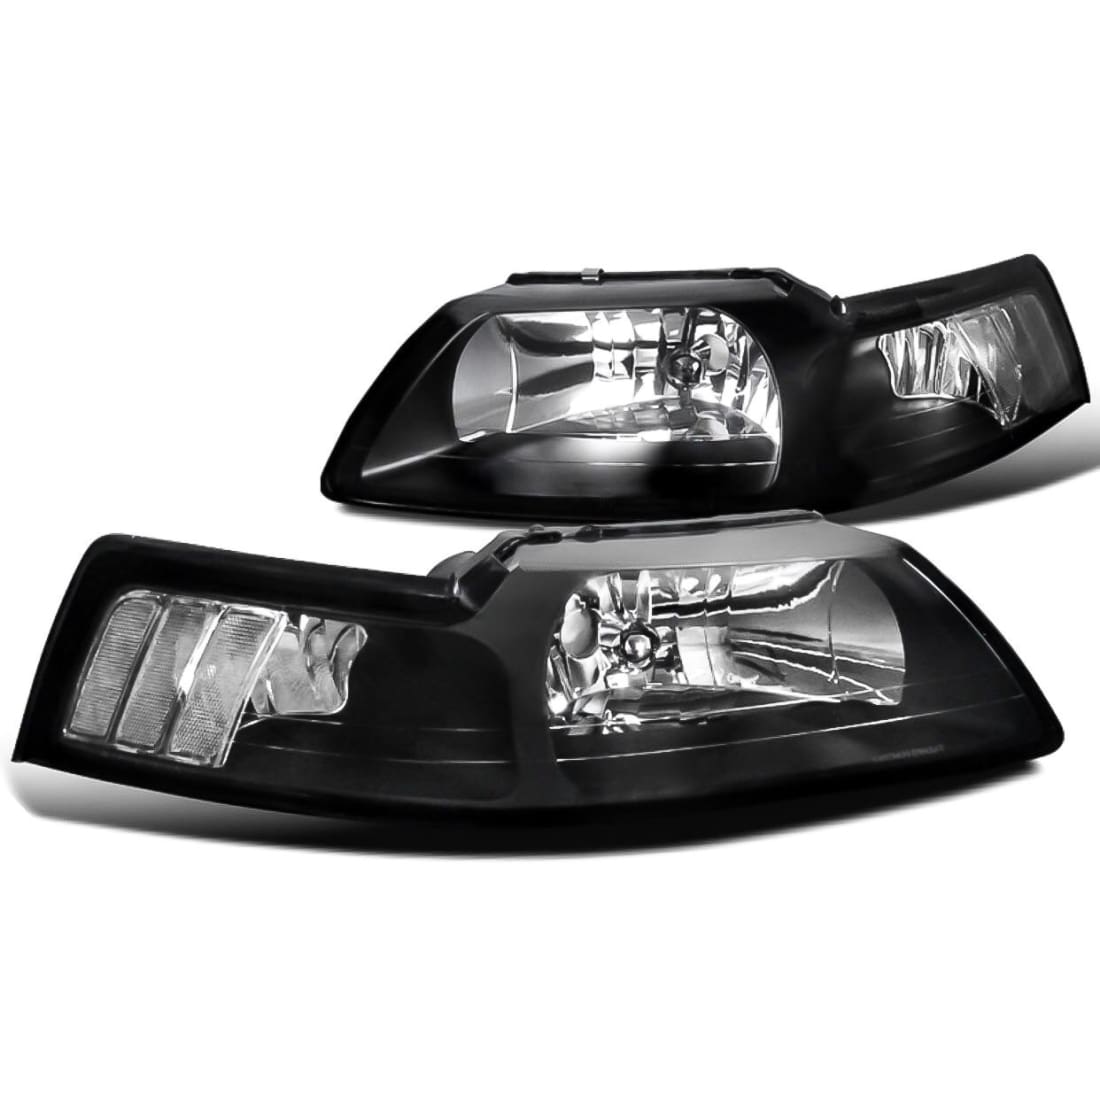 1999-2004 Mustang Clear Corner Headlight Assembly (Pair)